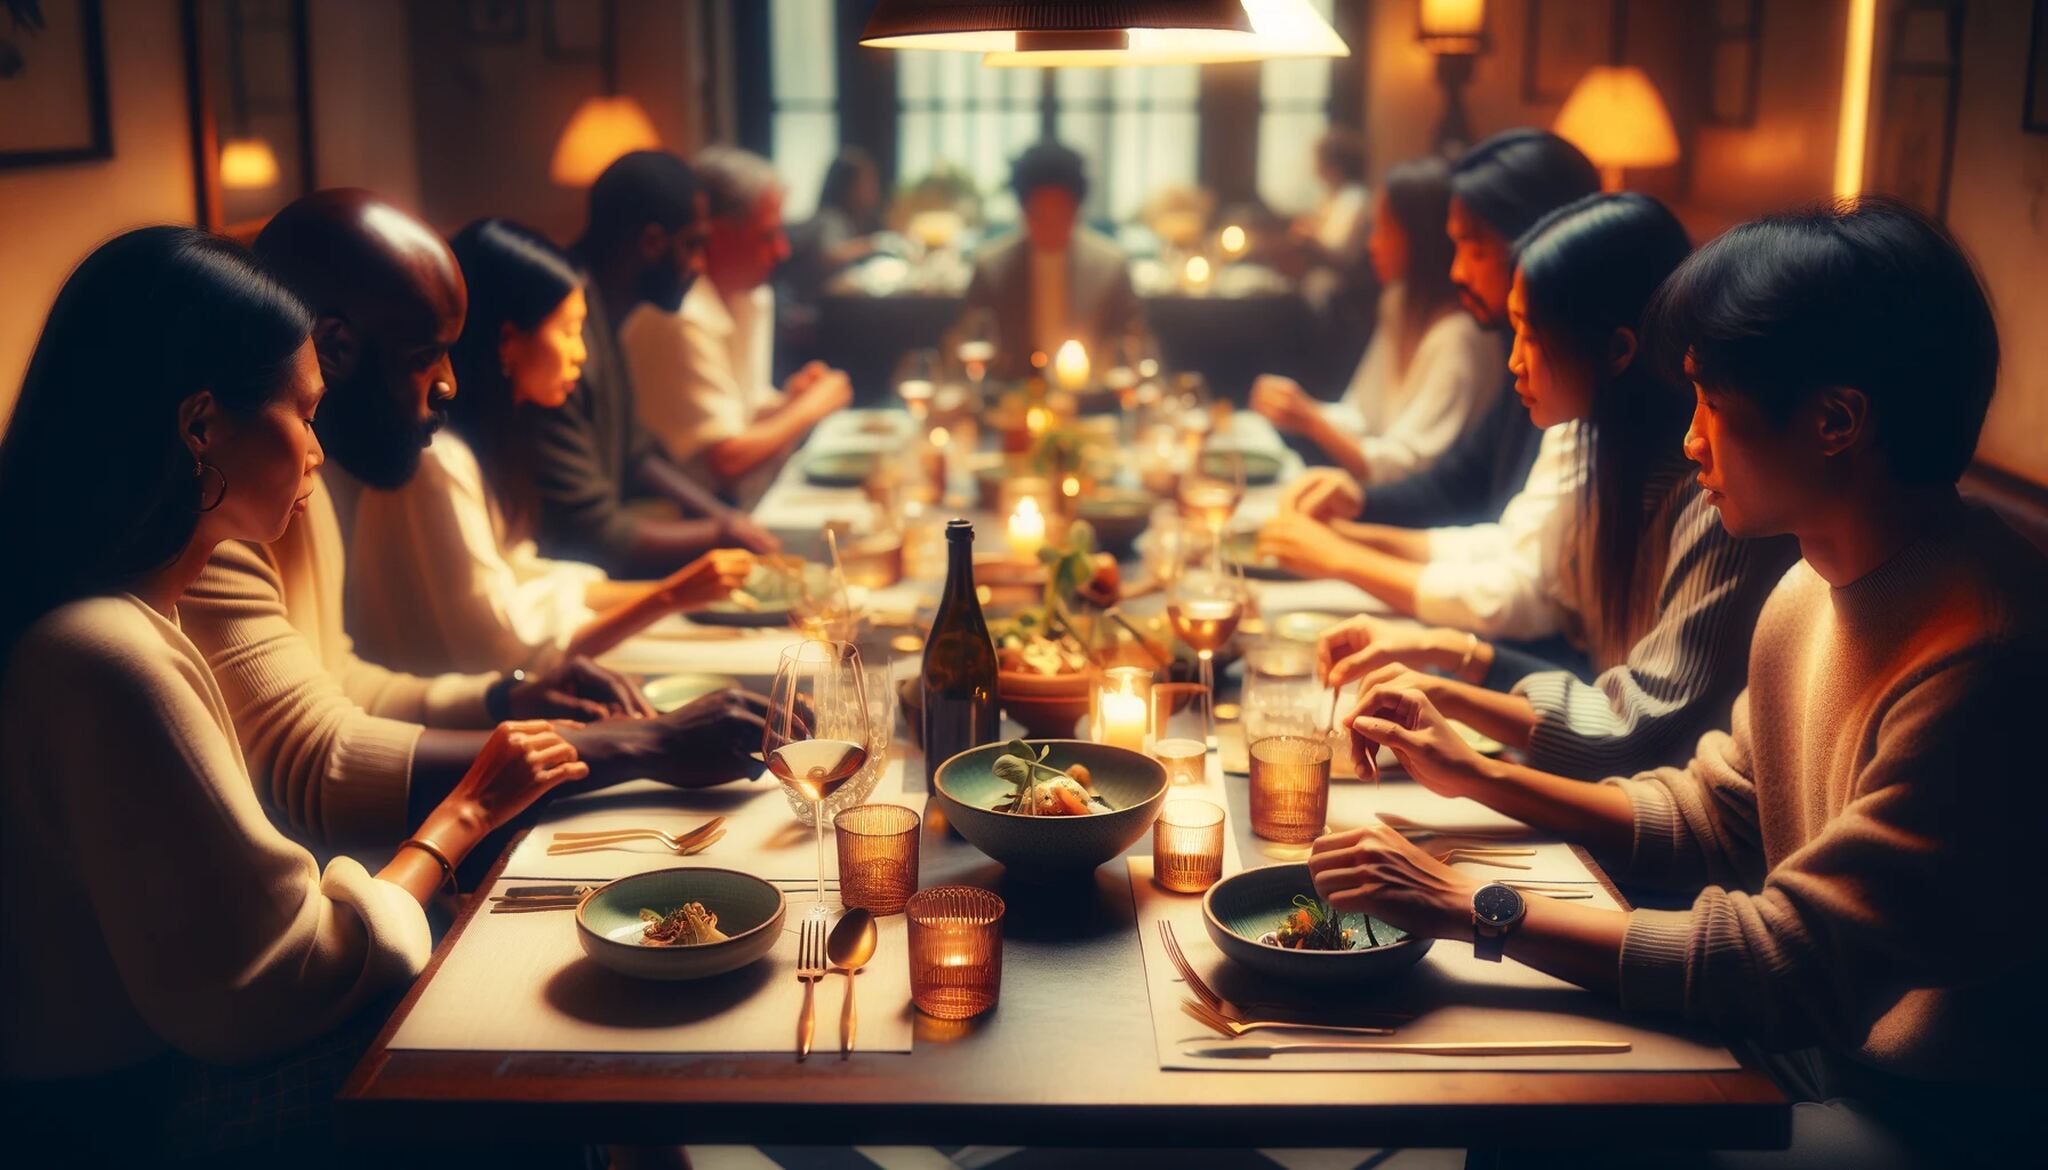 A close-up view of a table in a cozy restaurant, featuring a small group of customers eating their food